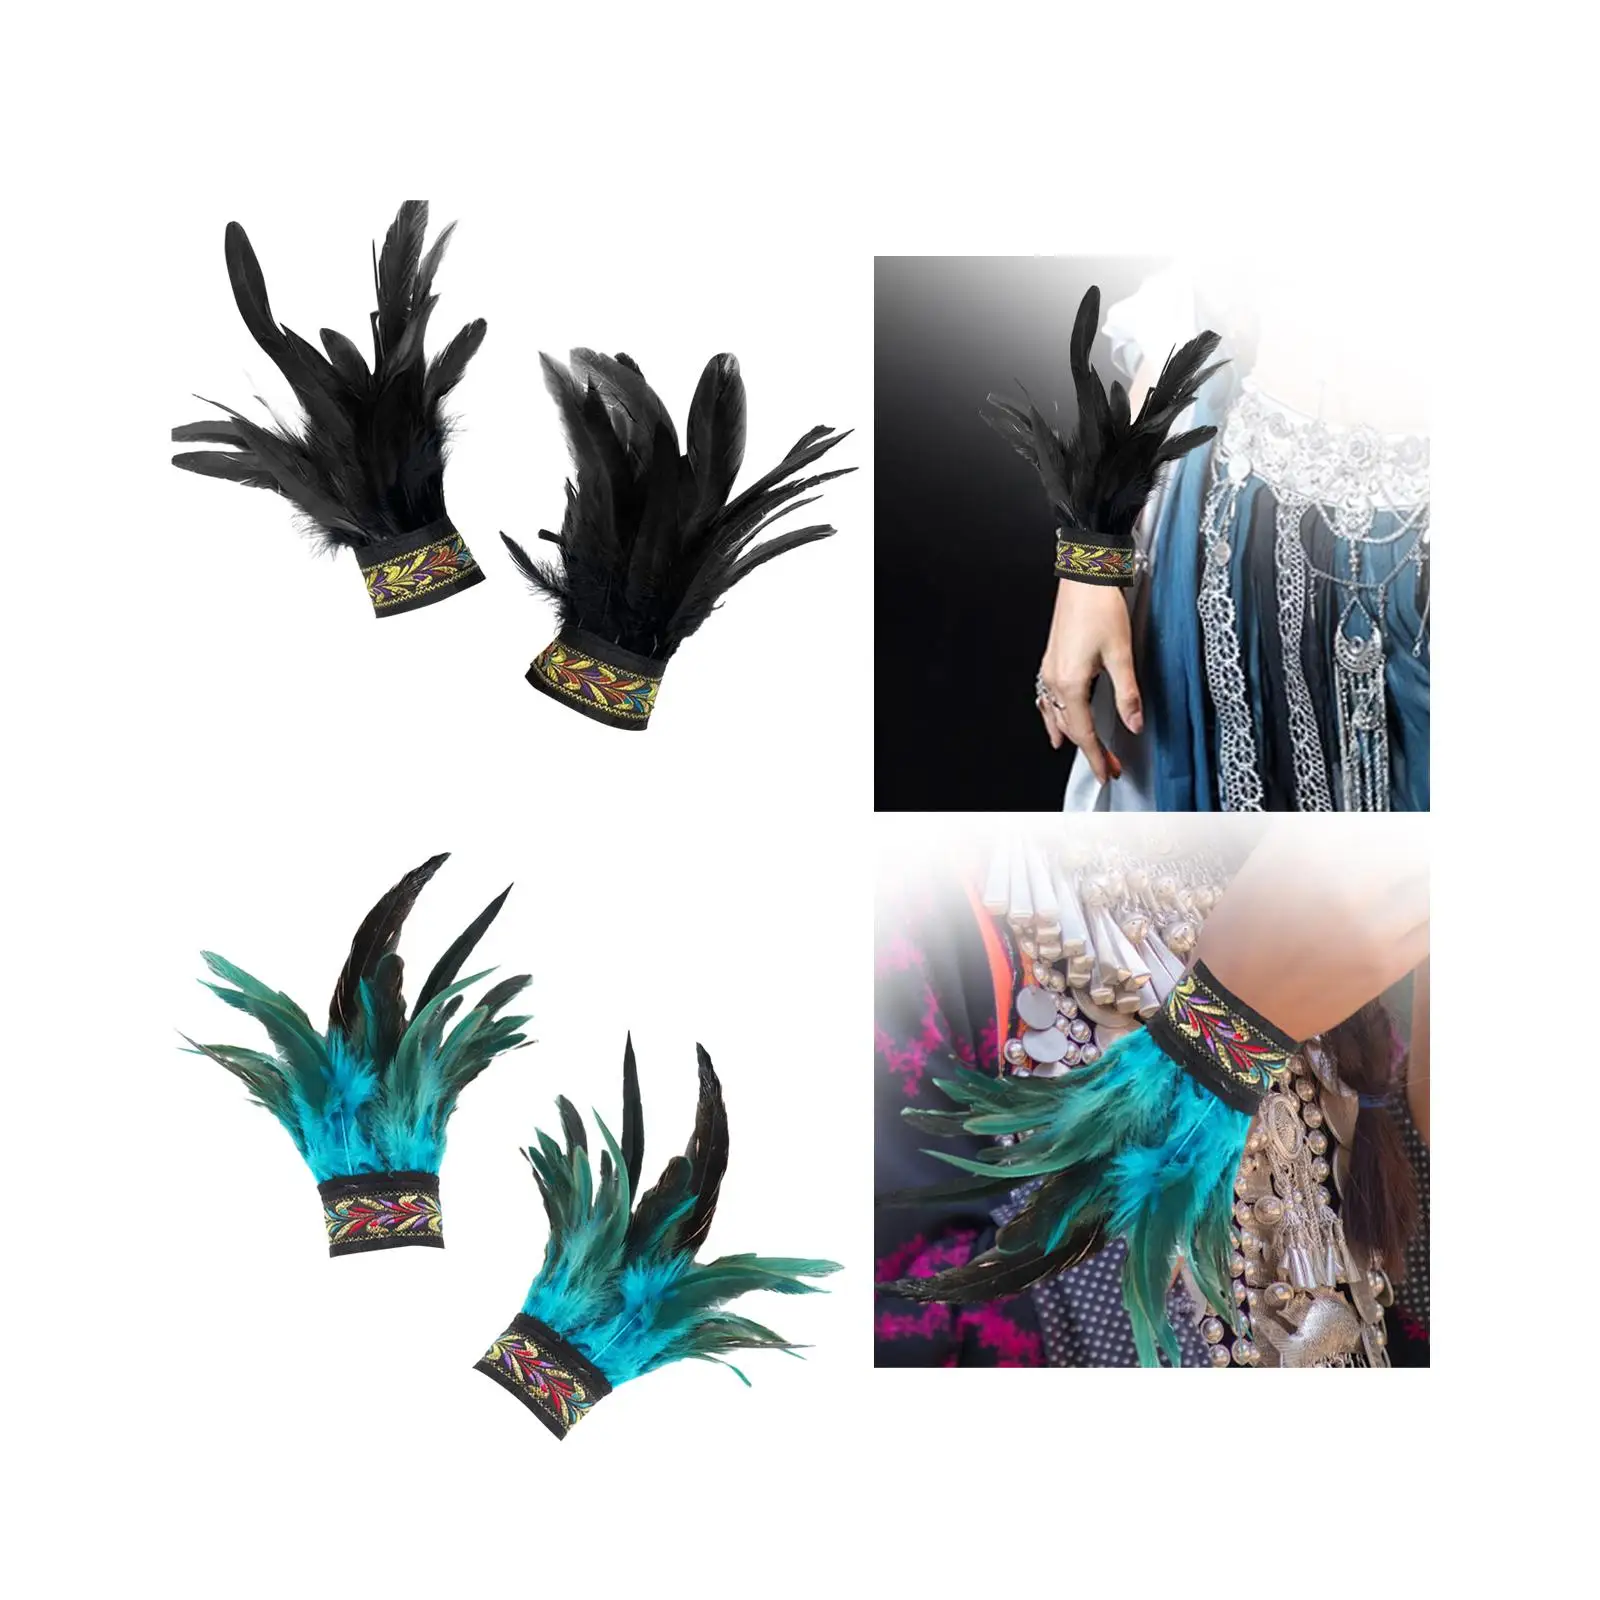 Feather Wrist Cuffs Feather Gloves Arm Warmers Gothic Faux Fur Cuff Sleeves for Halloween Cosplay Costume Stage Decorations